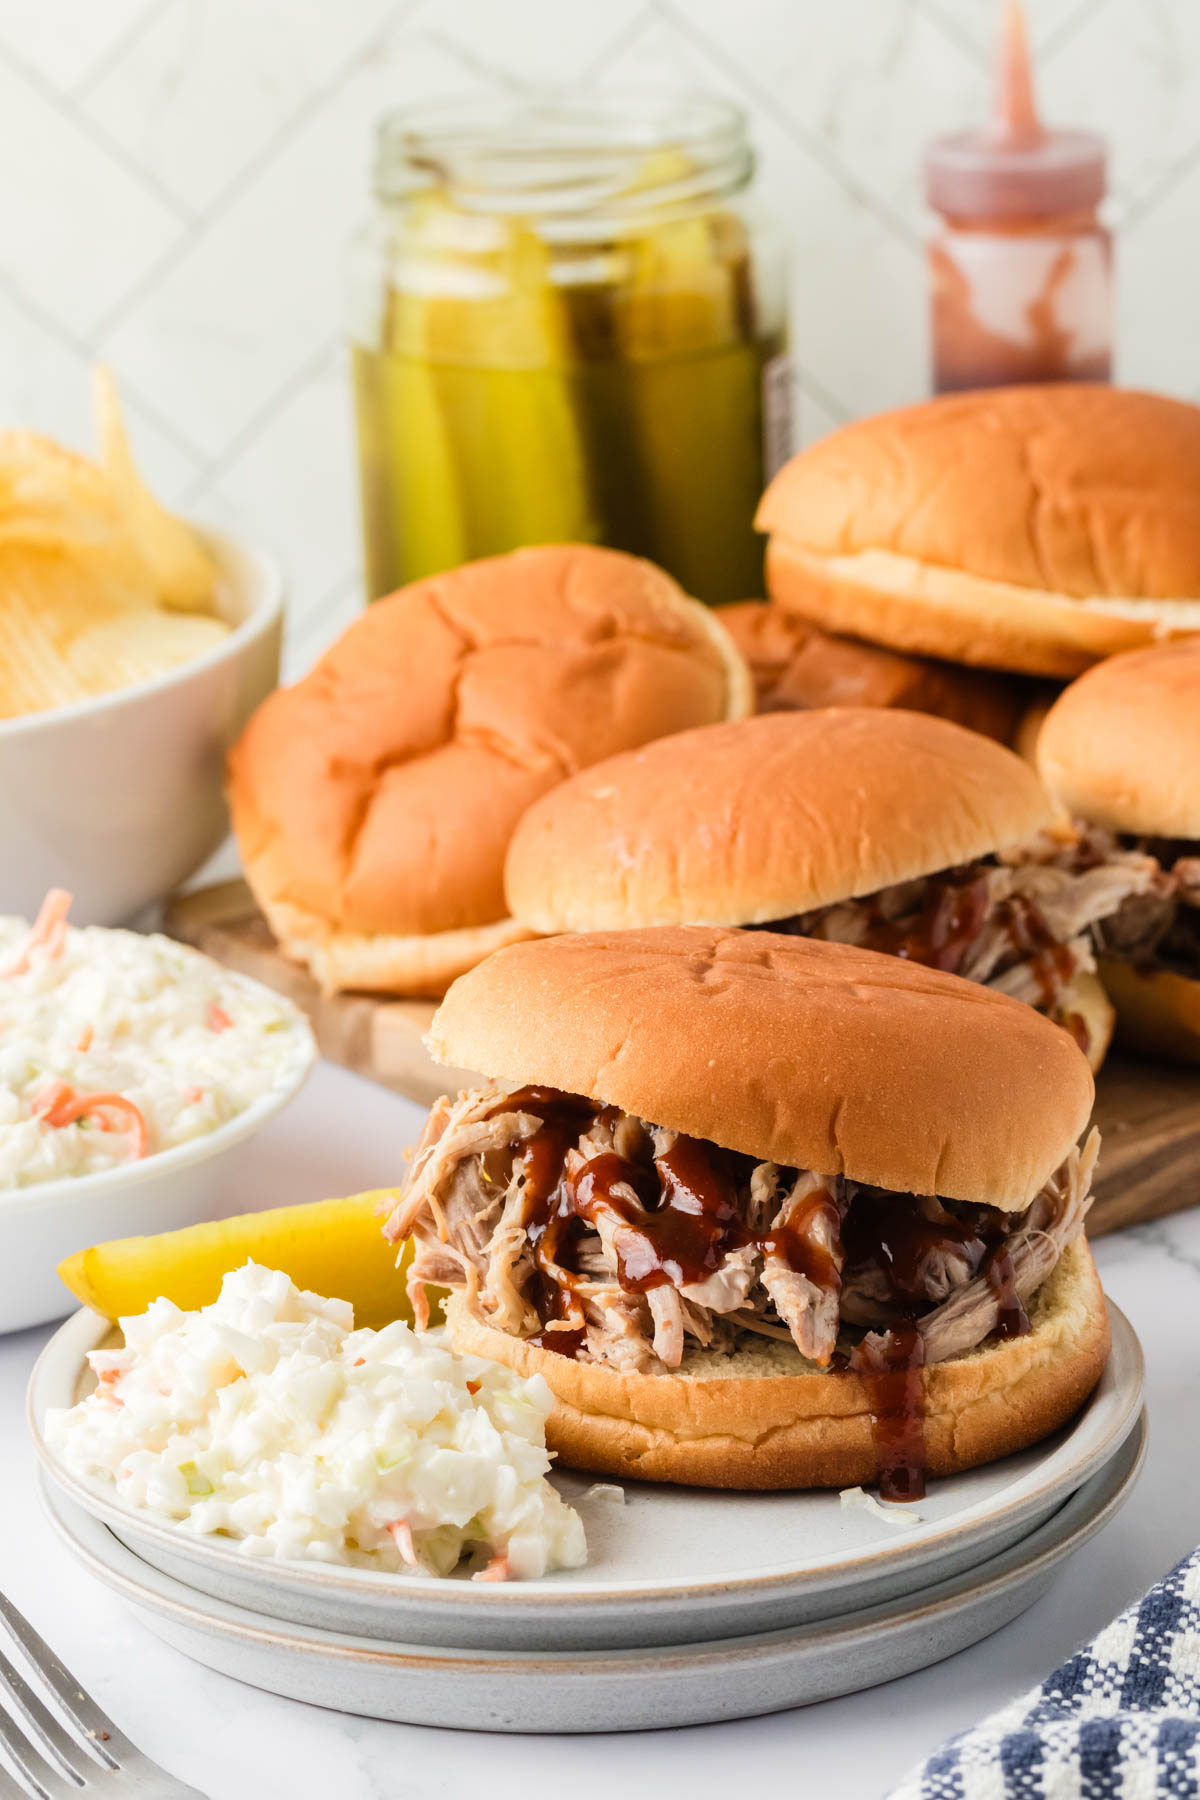 Pulled pork sandwiches are displayed on a wooden board and on a plate, with a single sandwich plated with cole slaw and a pickle spear in the foreground. 